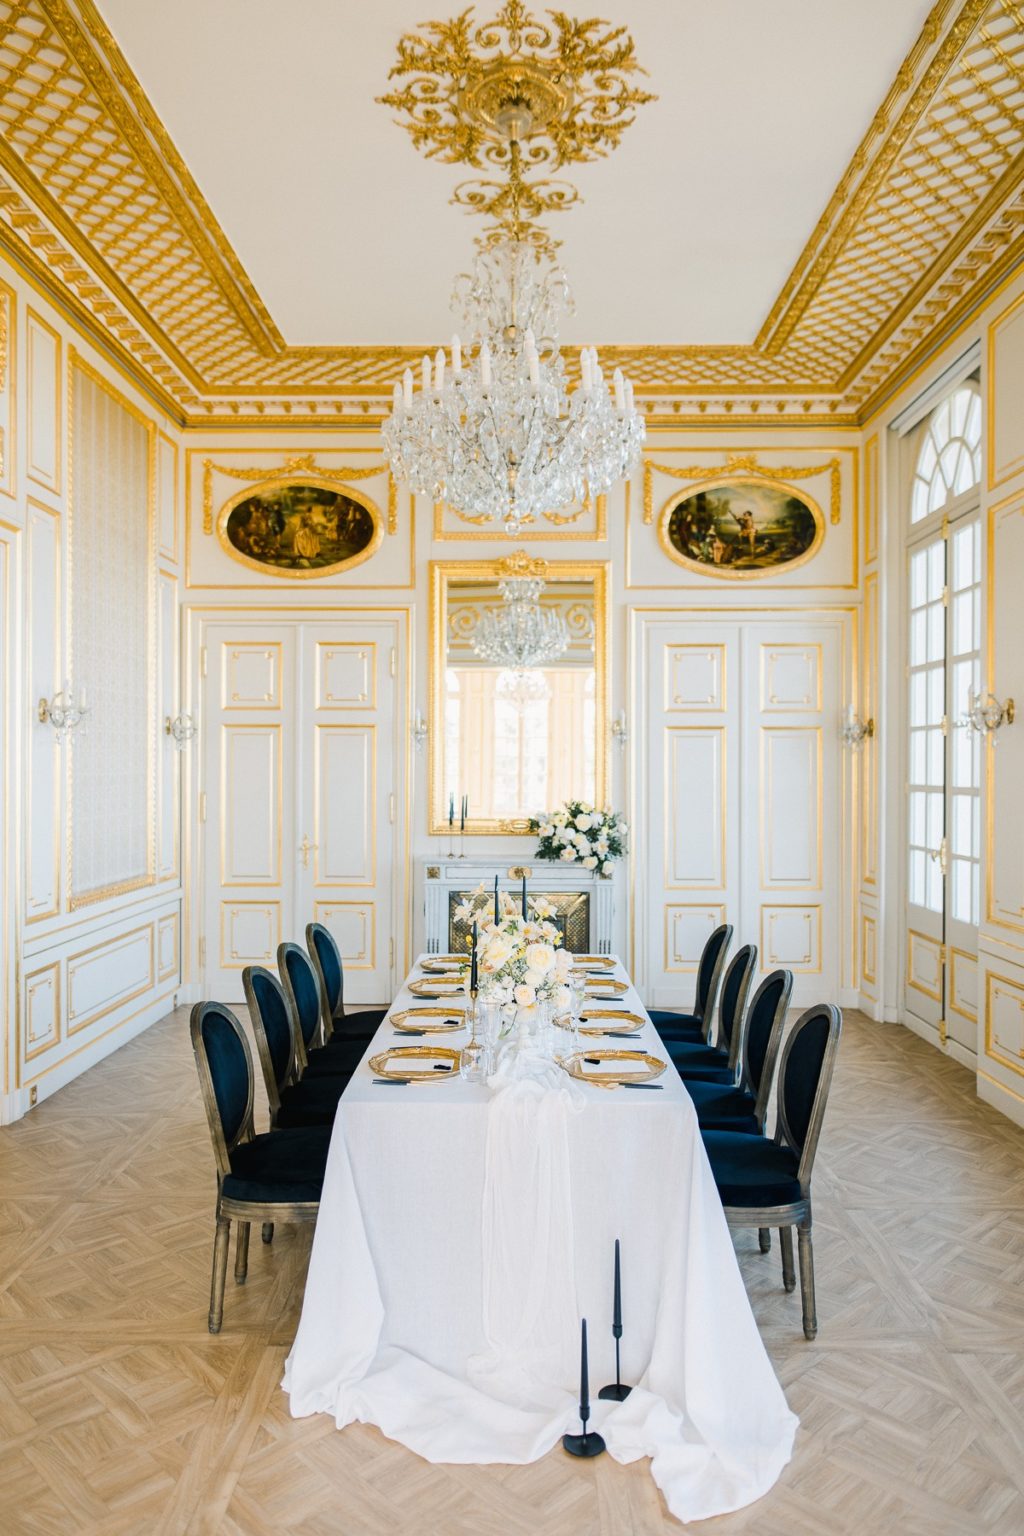 Chic Black and Gold Destination Wedding at Chateau Saint Georges, France